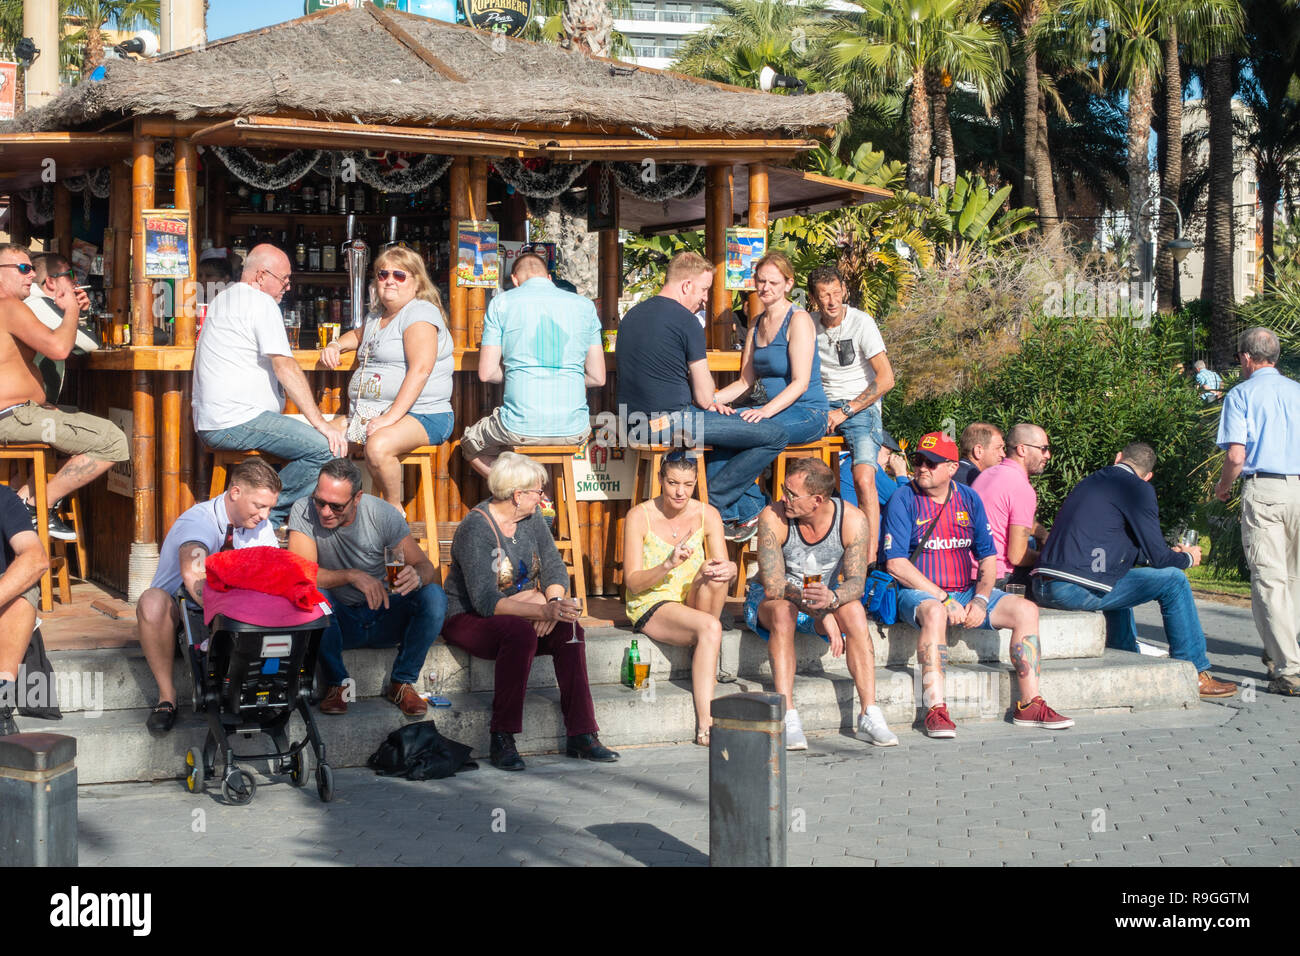 Benidorm, Costa Blanca, Spain, 24th December 2018. British holidaymakers escaping from the cold weather back home flood this popular resort during the Christmas holidays. Drinkers enjoy the hot temps and calm weather at the famous Tiki Beach Bar on Levante beach today in Benidorm on the Costa Blanca coast. Temperatures were in the mid to high 20's Celsius today in this Mediterranean hotspot. Credit: Mick Flynn/Alamy Live News Stock Photo